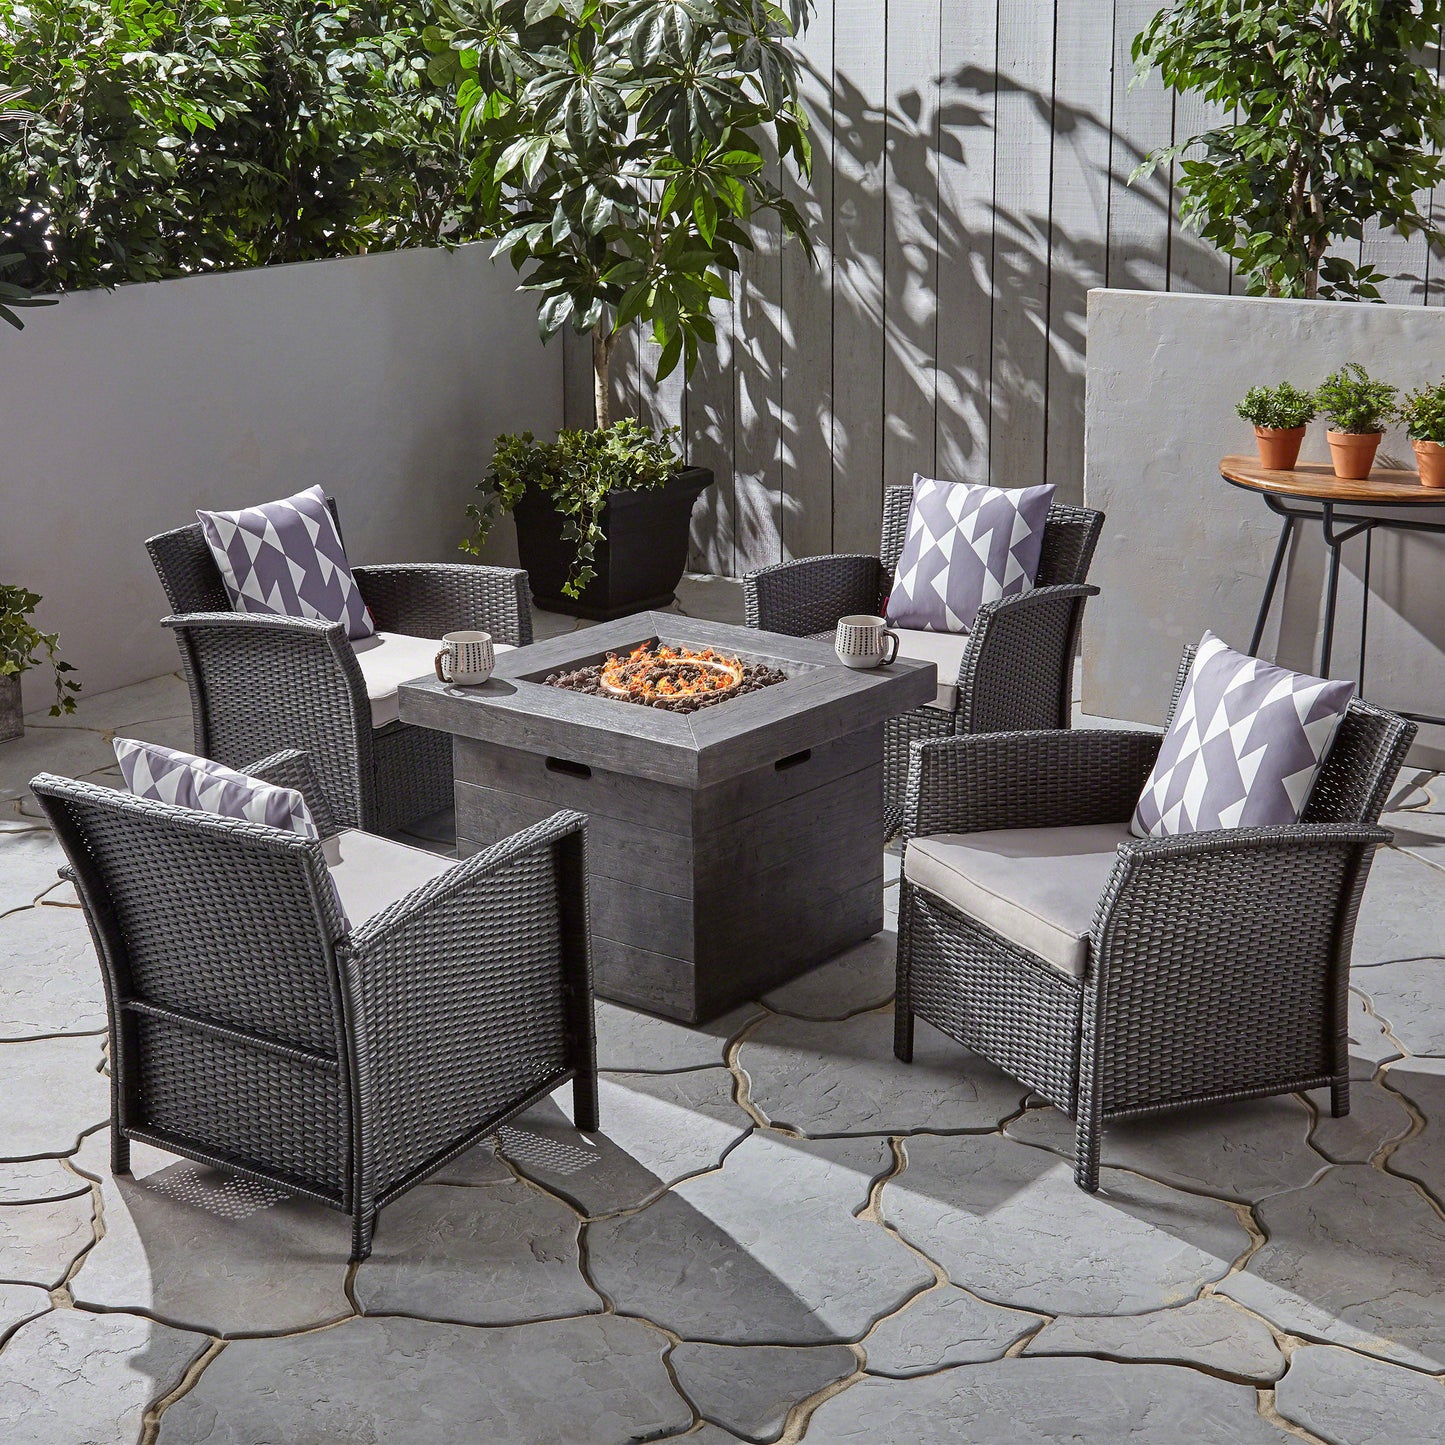 Laiah Outdoor 4 Piece Wicker Club Chair Chat Set with Wood Finished Fire Pit